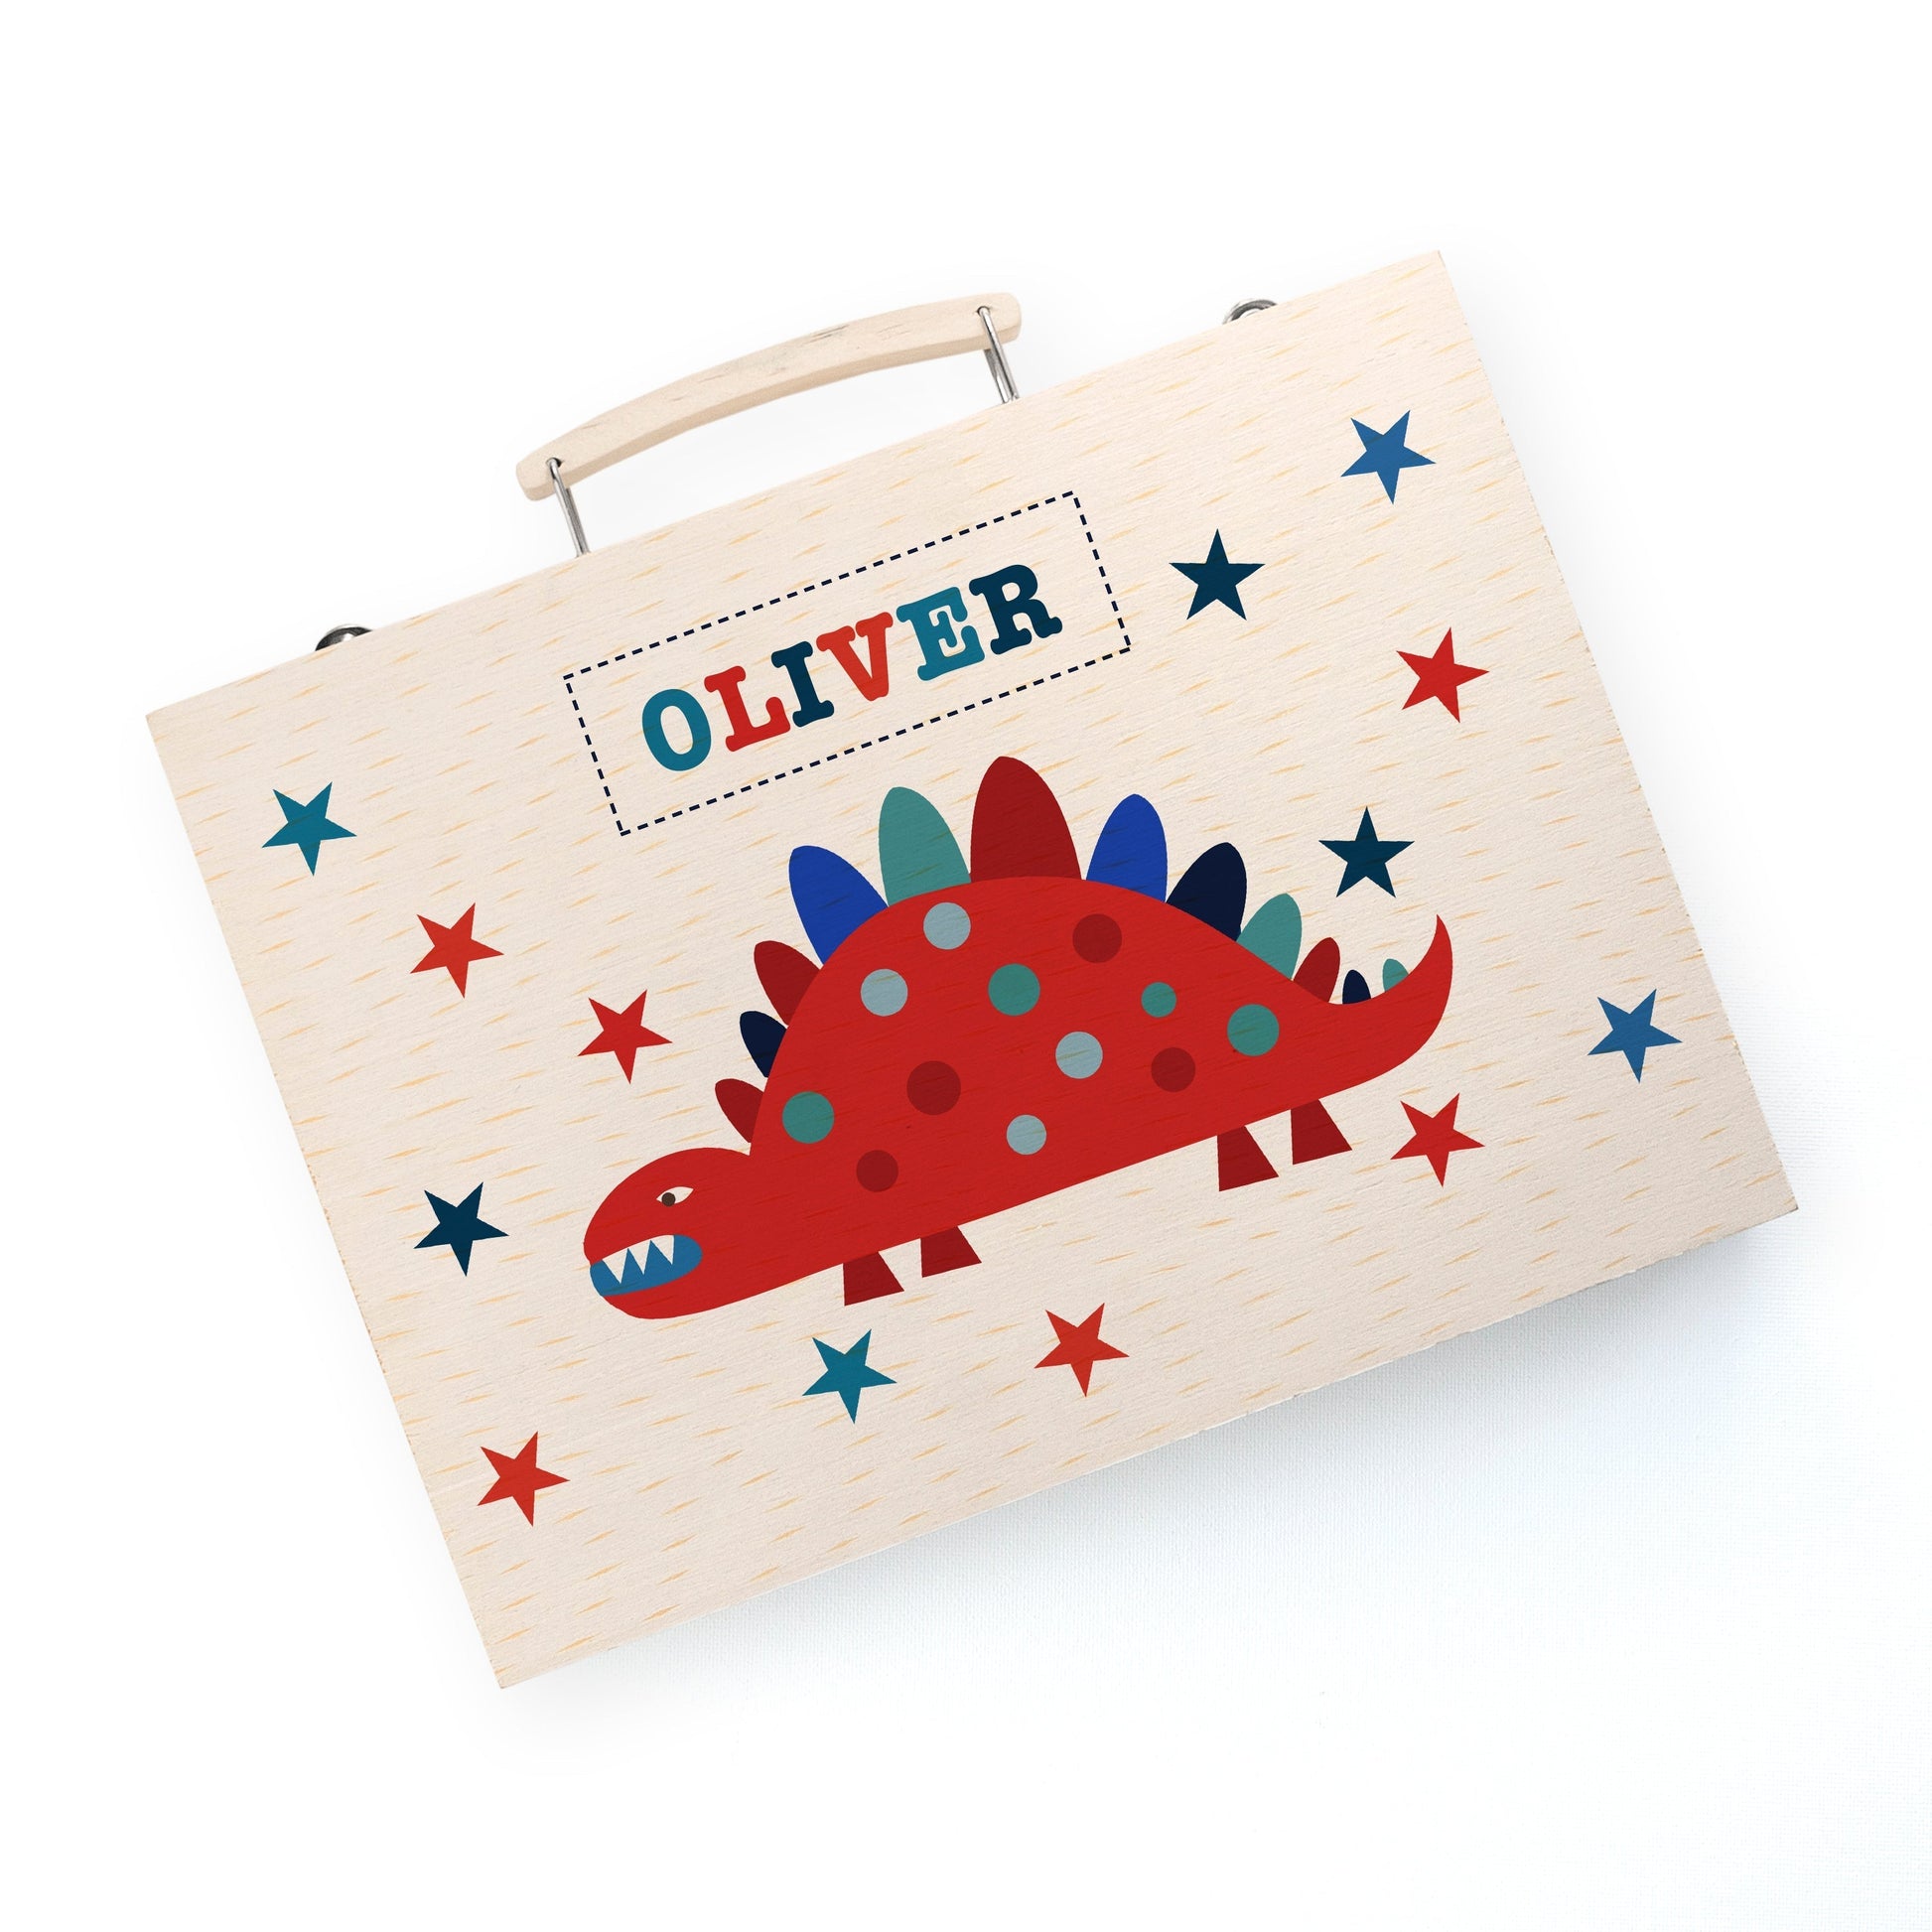 Personalized Art and Craft Sets - Personalized Kid’s Dinosaur Colouring Set 